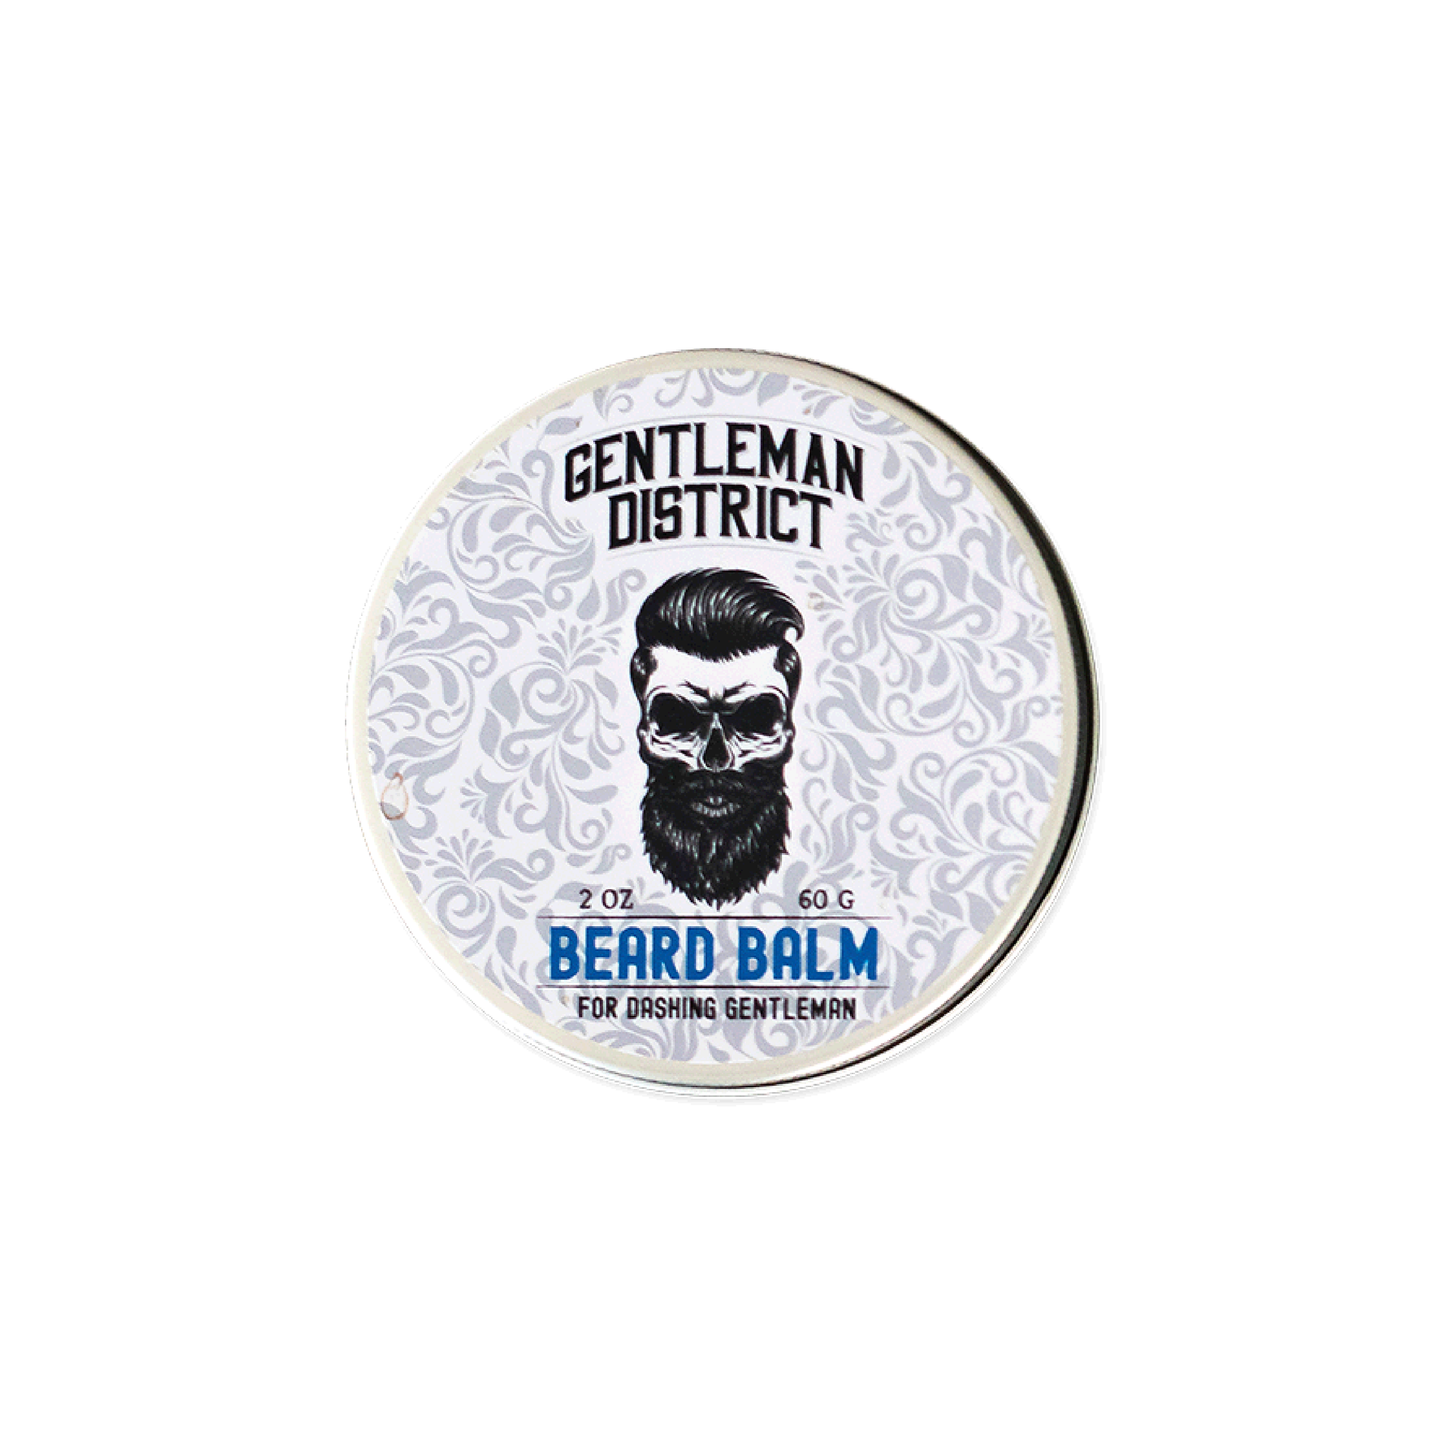 Capilo Gentleman District Beard Balm (2oz Container), Paraben Free, Salt Free, Sodium Sulfate Free, Silicone Free, Mineral Oil and Petrolatum Free